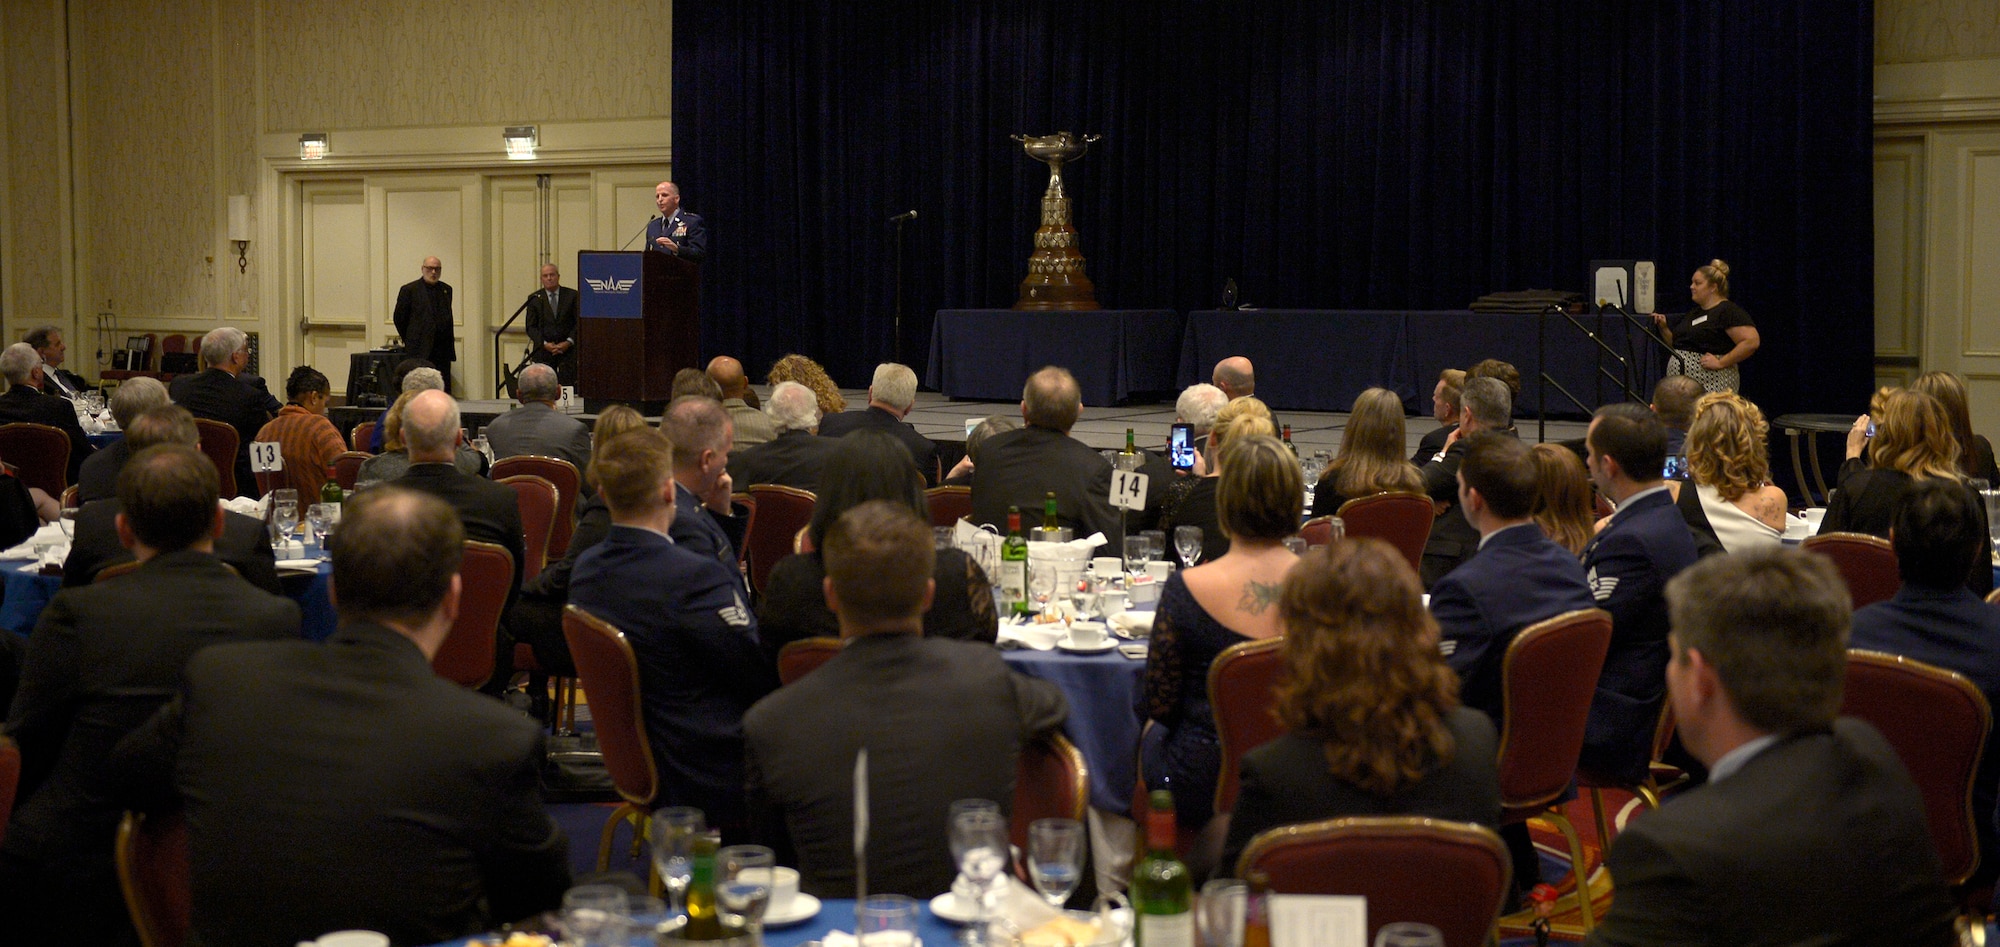 Air Force Vice Chief of Staff Gen. Stephen W. Wilson speaks during an award dinner in Arlington, Va., Nov. 29, 2017. During the dinner Wilson presented members of the AC-130U Gunship aircrew known as "Spooky 43" the Mackay Trophy. First awarded in 1912, the Mackay Trophy honors the most meritorious U.S. Air Force flight of the previous year. (U.S. Air Force photo by Staff Sgt. Rusty Frank)